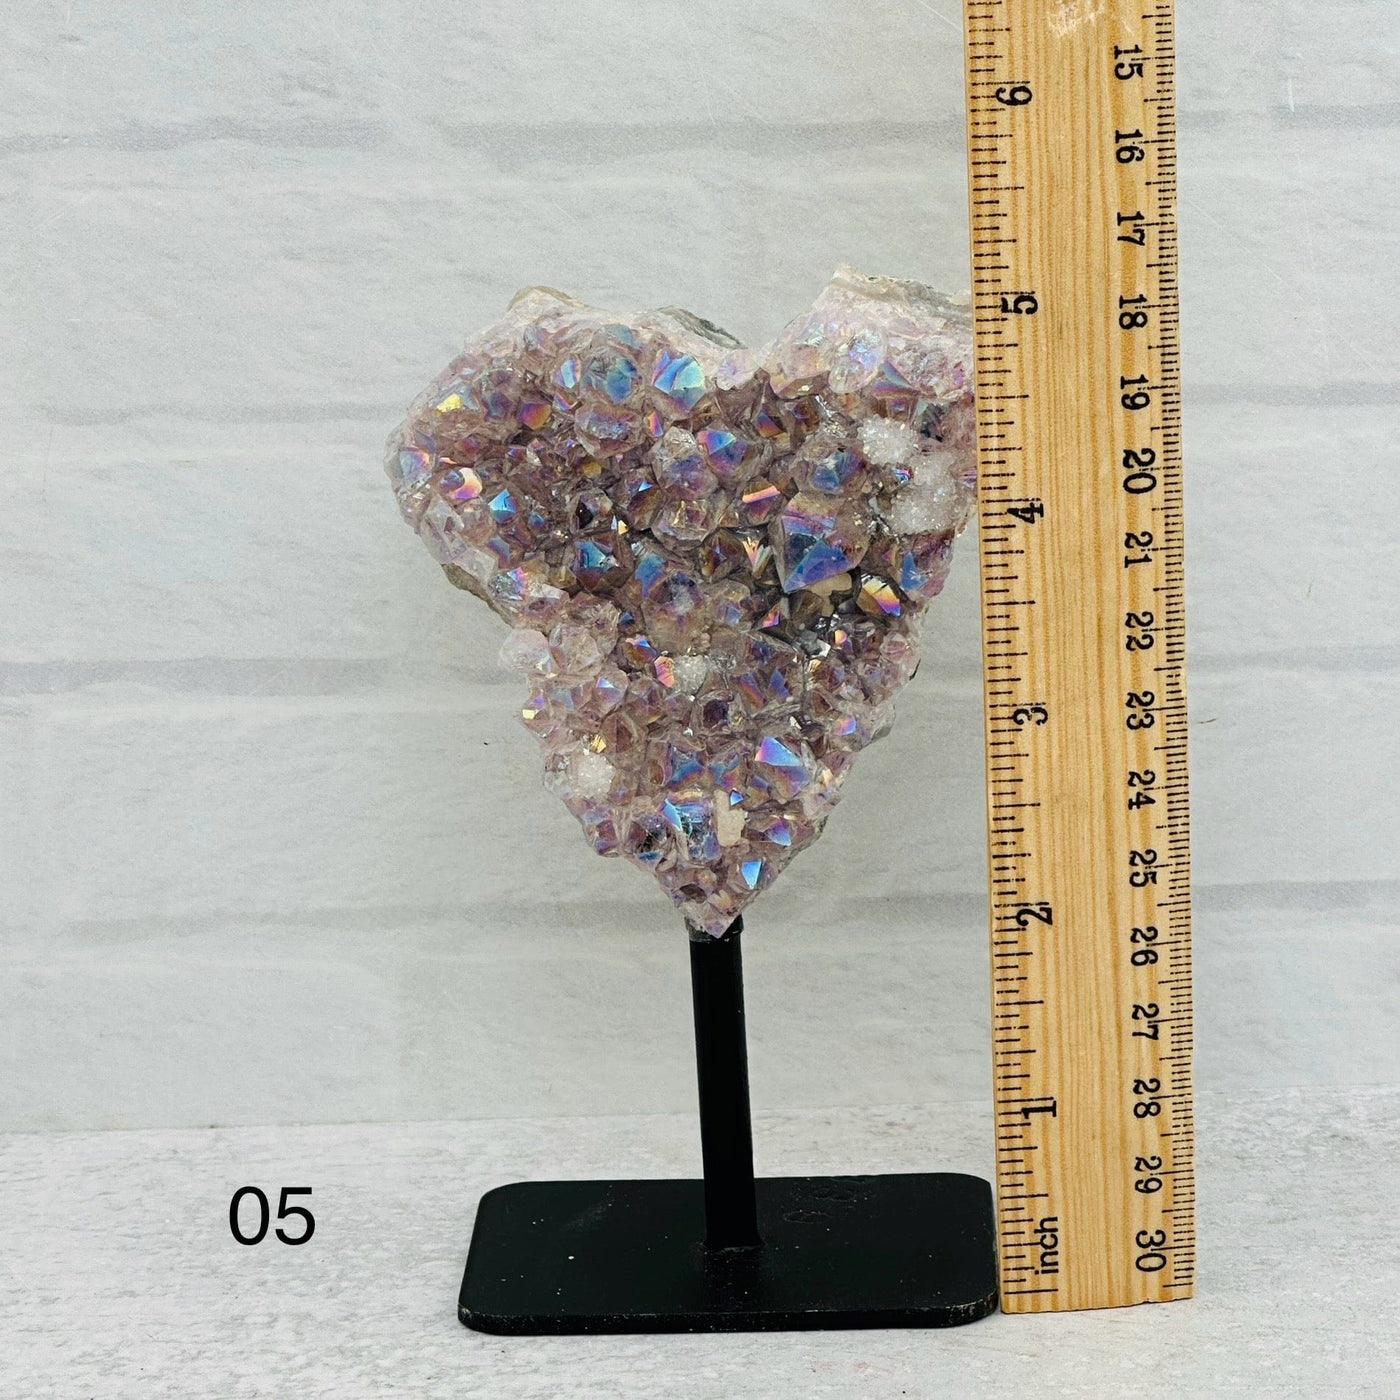 Amethyst Druzy Crystal with Angel Aura Pearly Finish on metal stand - You Choose -